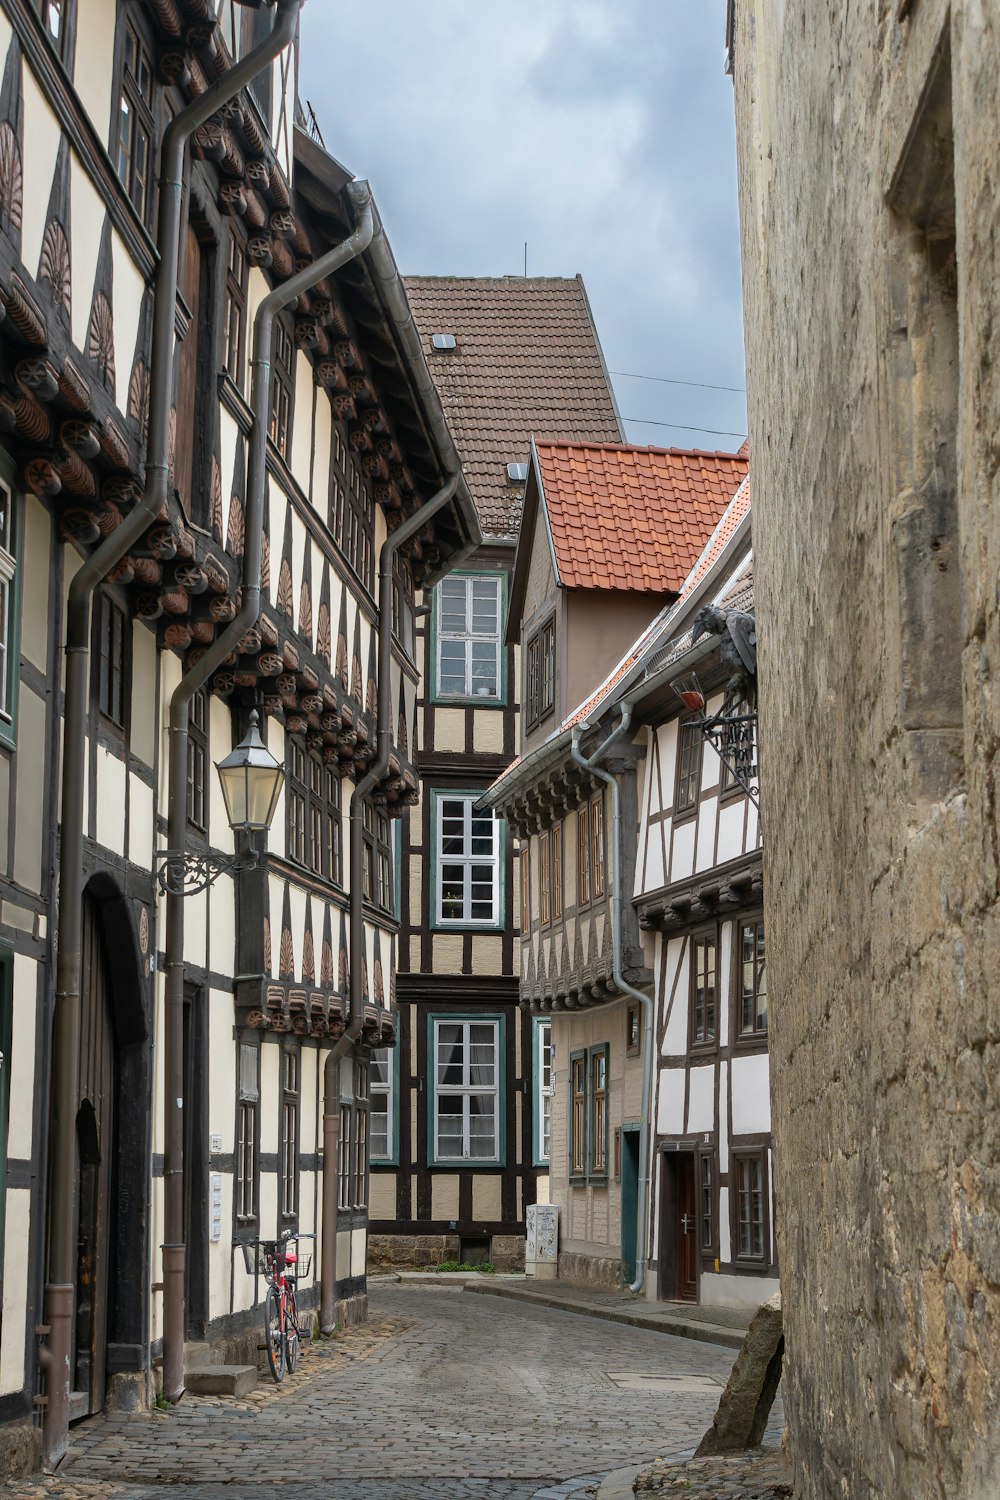 a cobblestone street lined with half - timber buildings